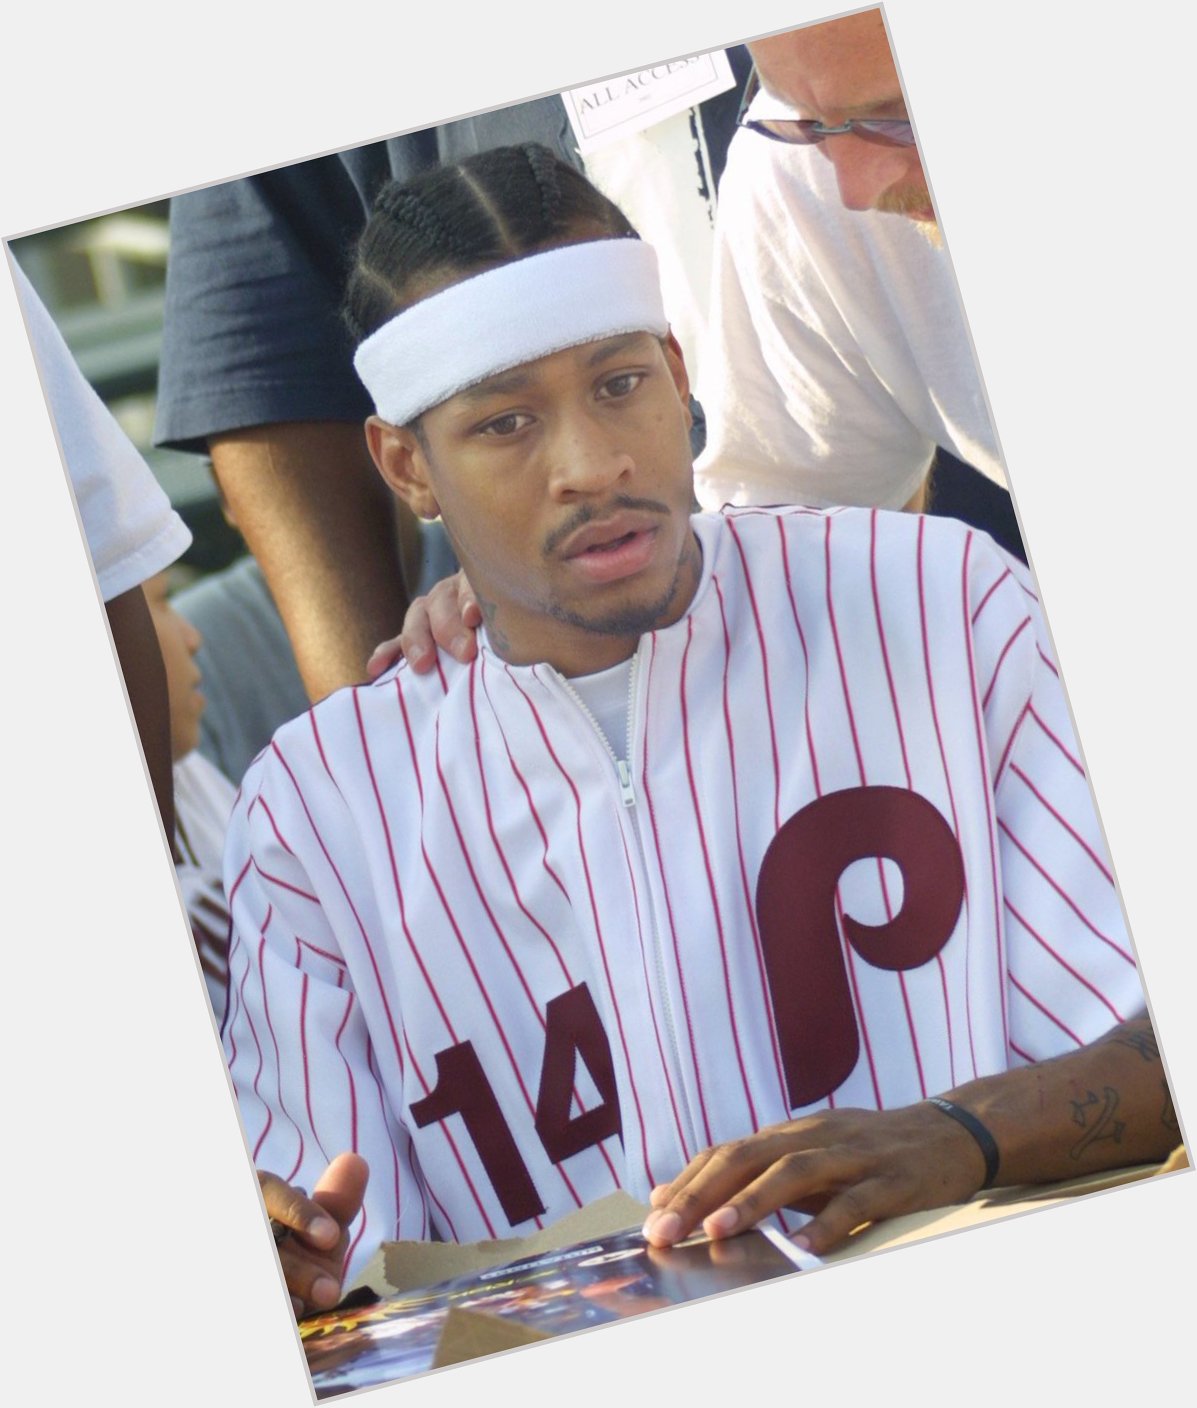 Happy birthday to Allen Iverson, who once wore a Phillies zip-up jersey while being told something truly shocking 